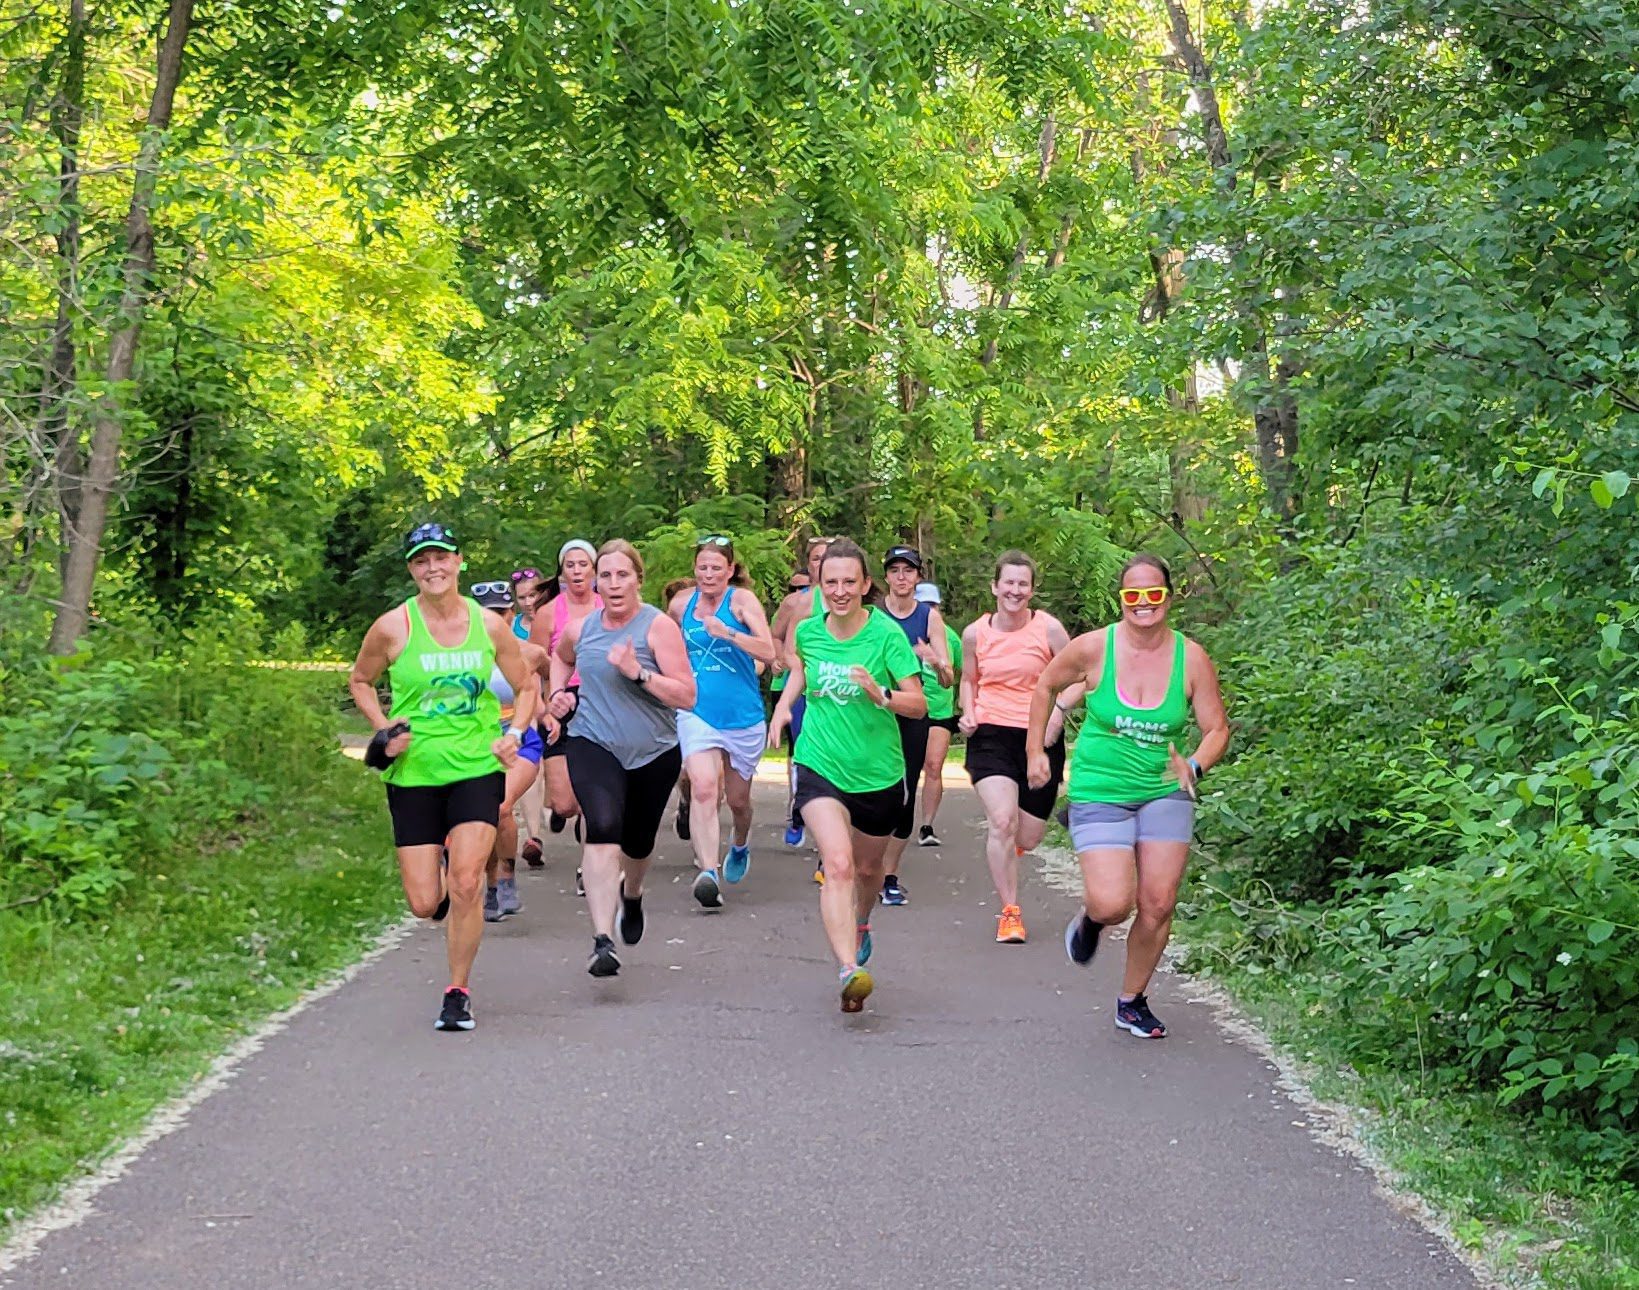 MOTR women running in a group on a path